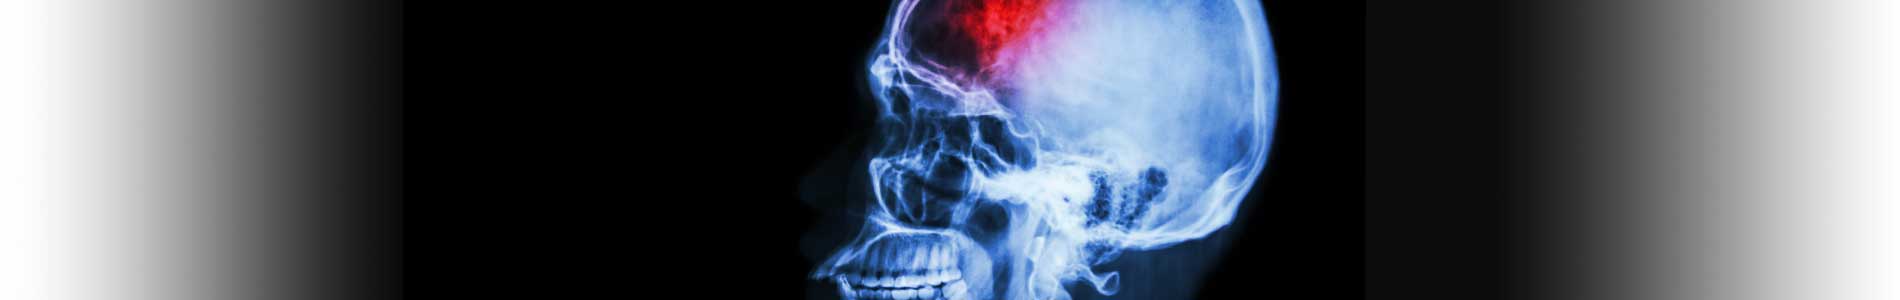 X-ray image of skull from the side in blue with red blod clot area for stroke